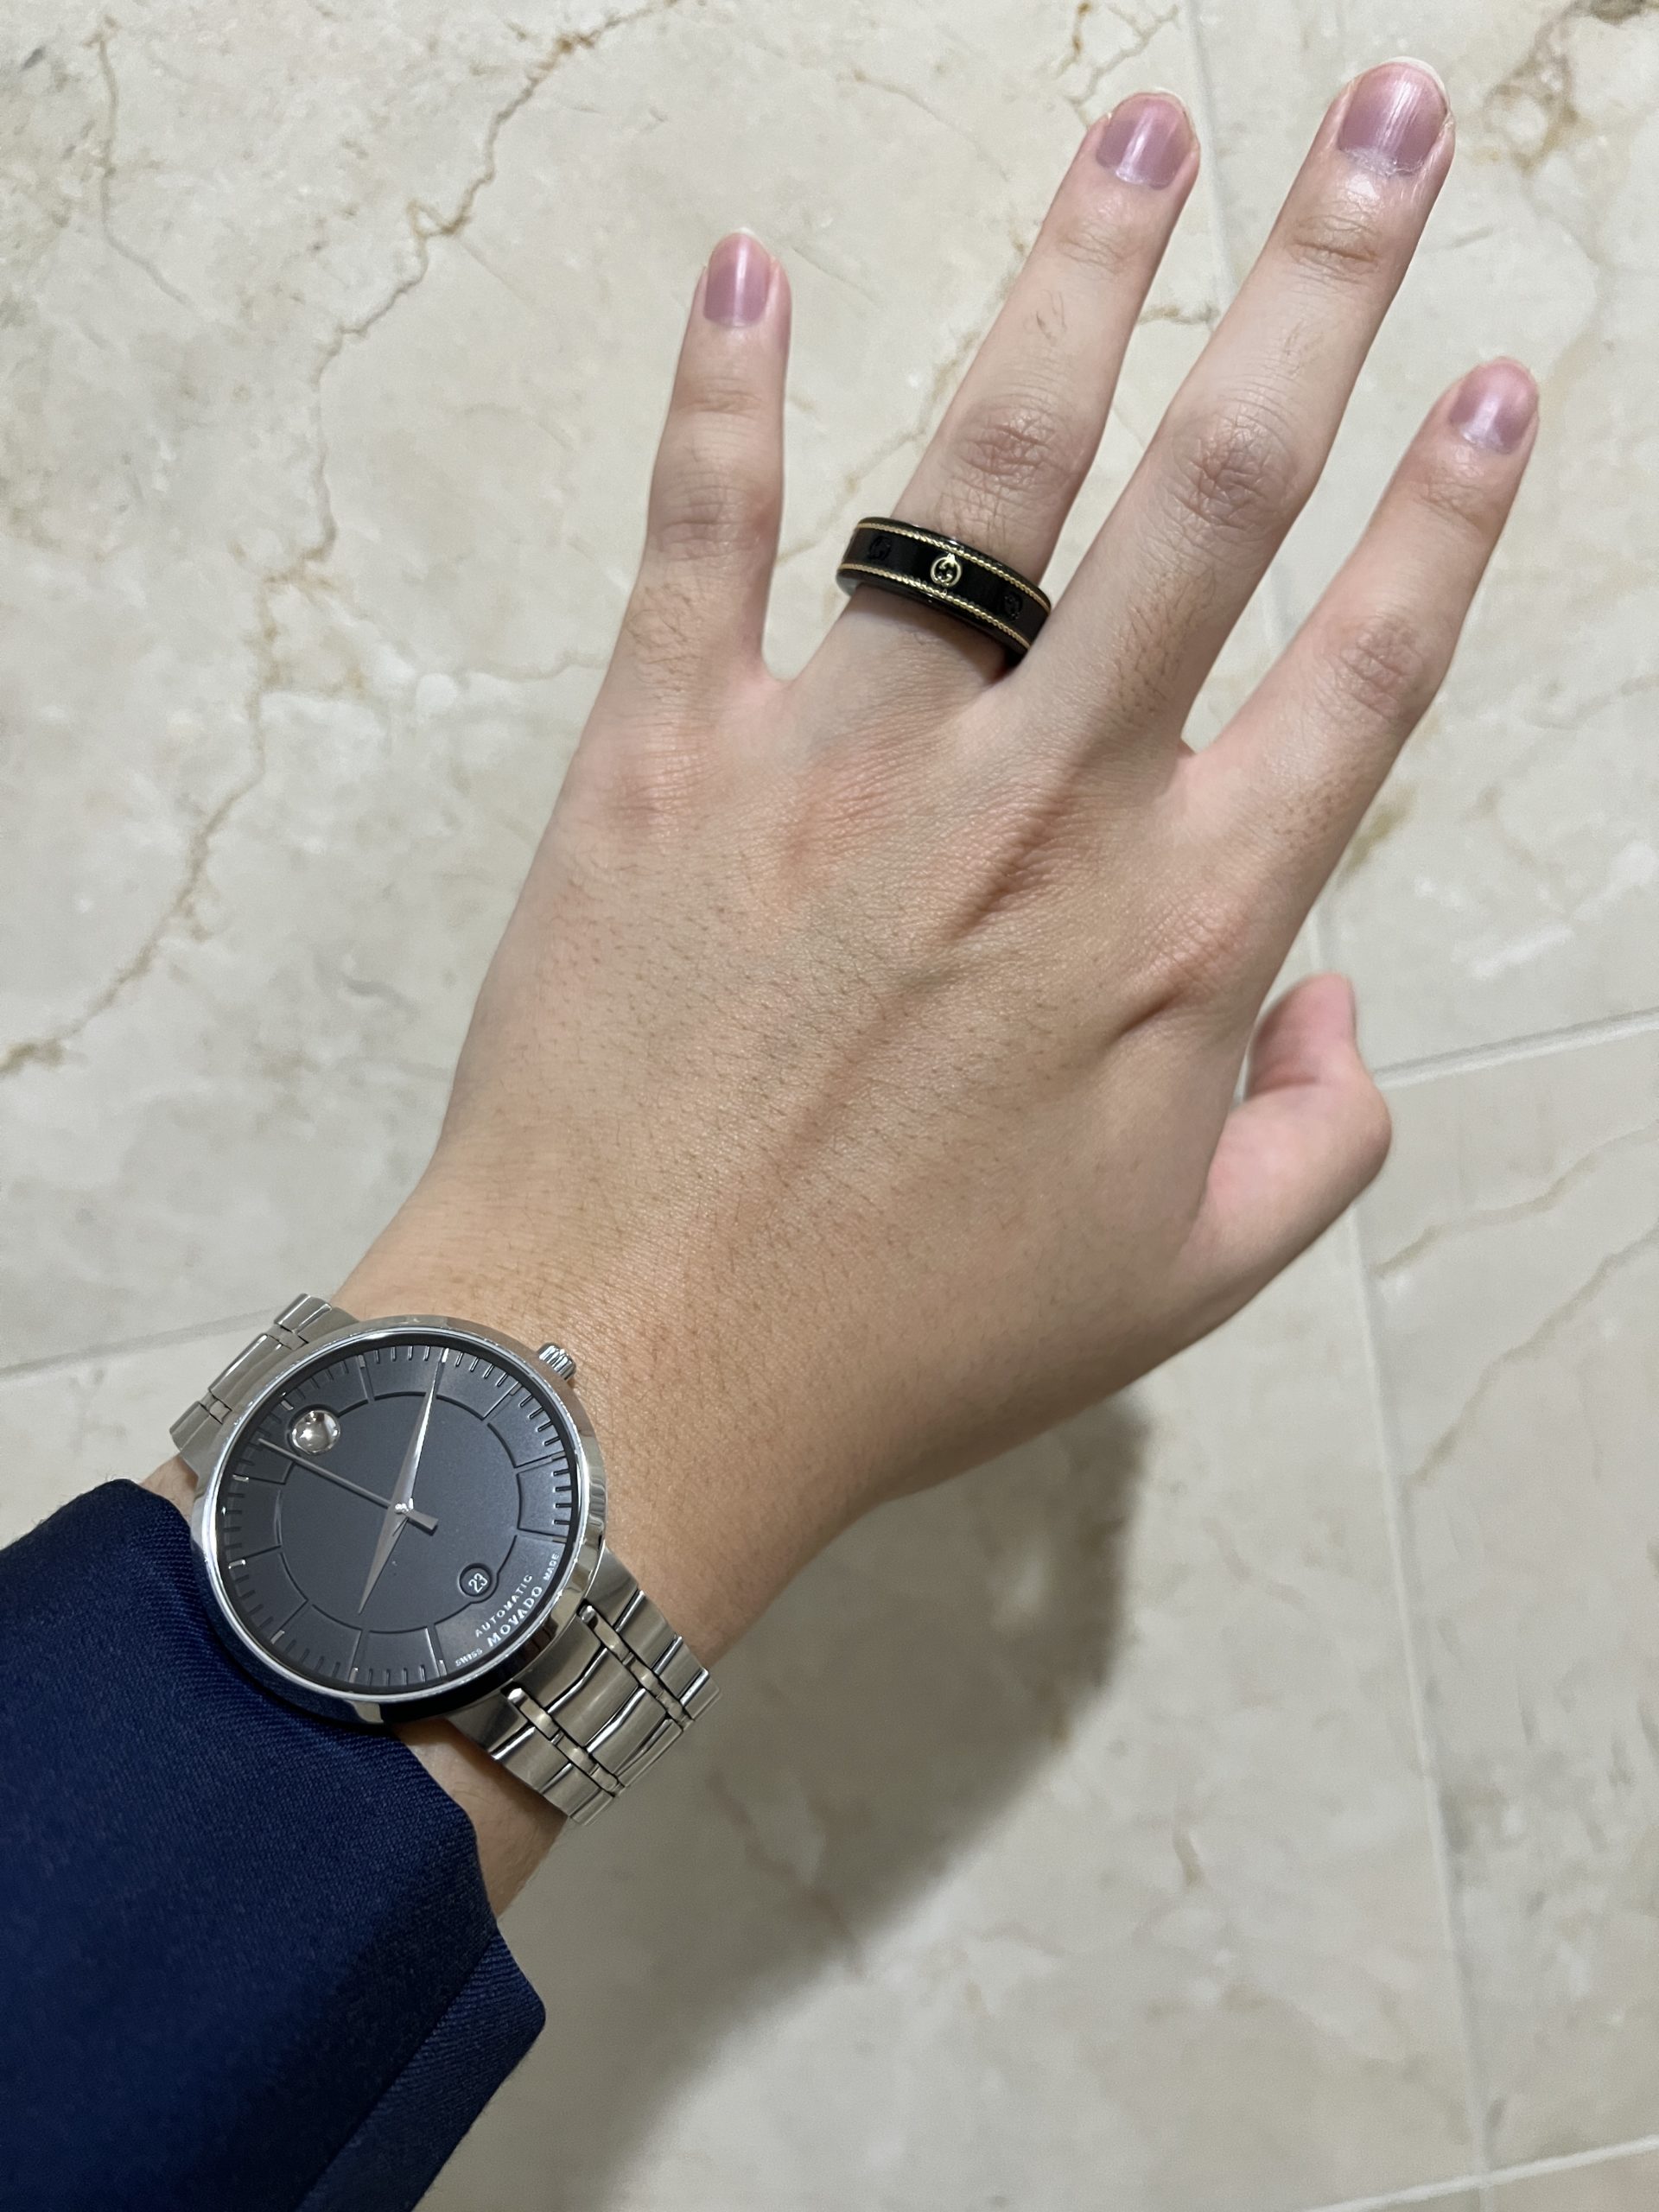 The Gucci x Oura Ring Returns for a Limited-Edition Run - The 